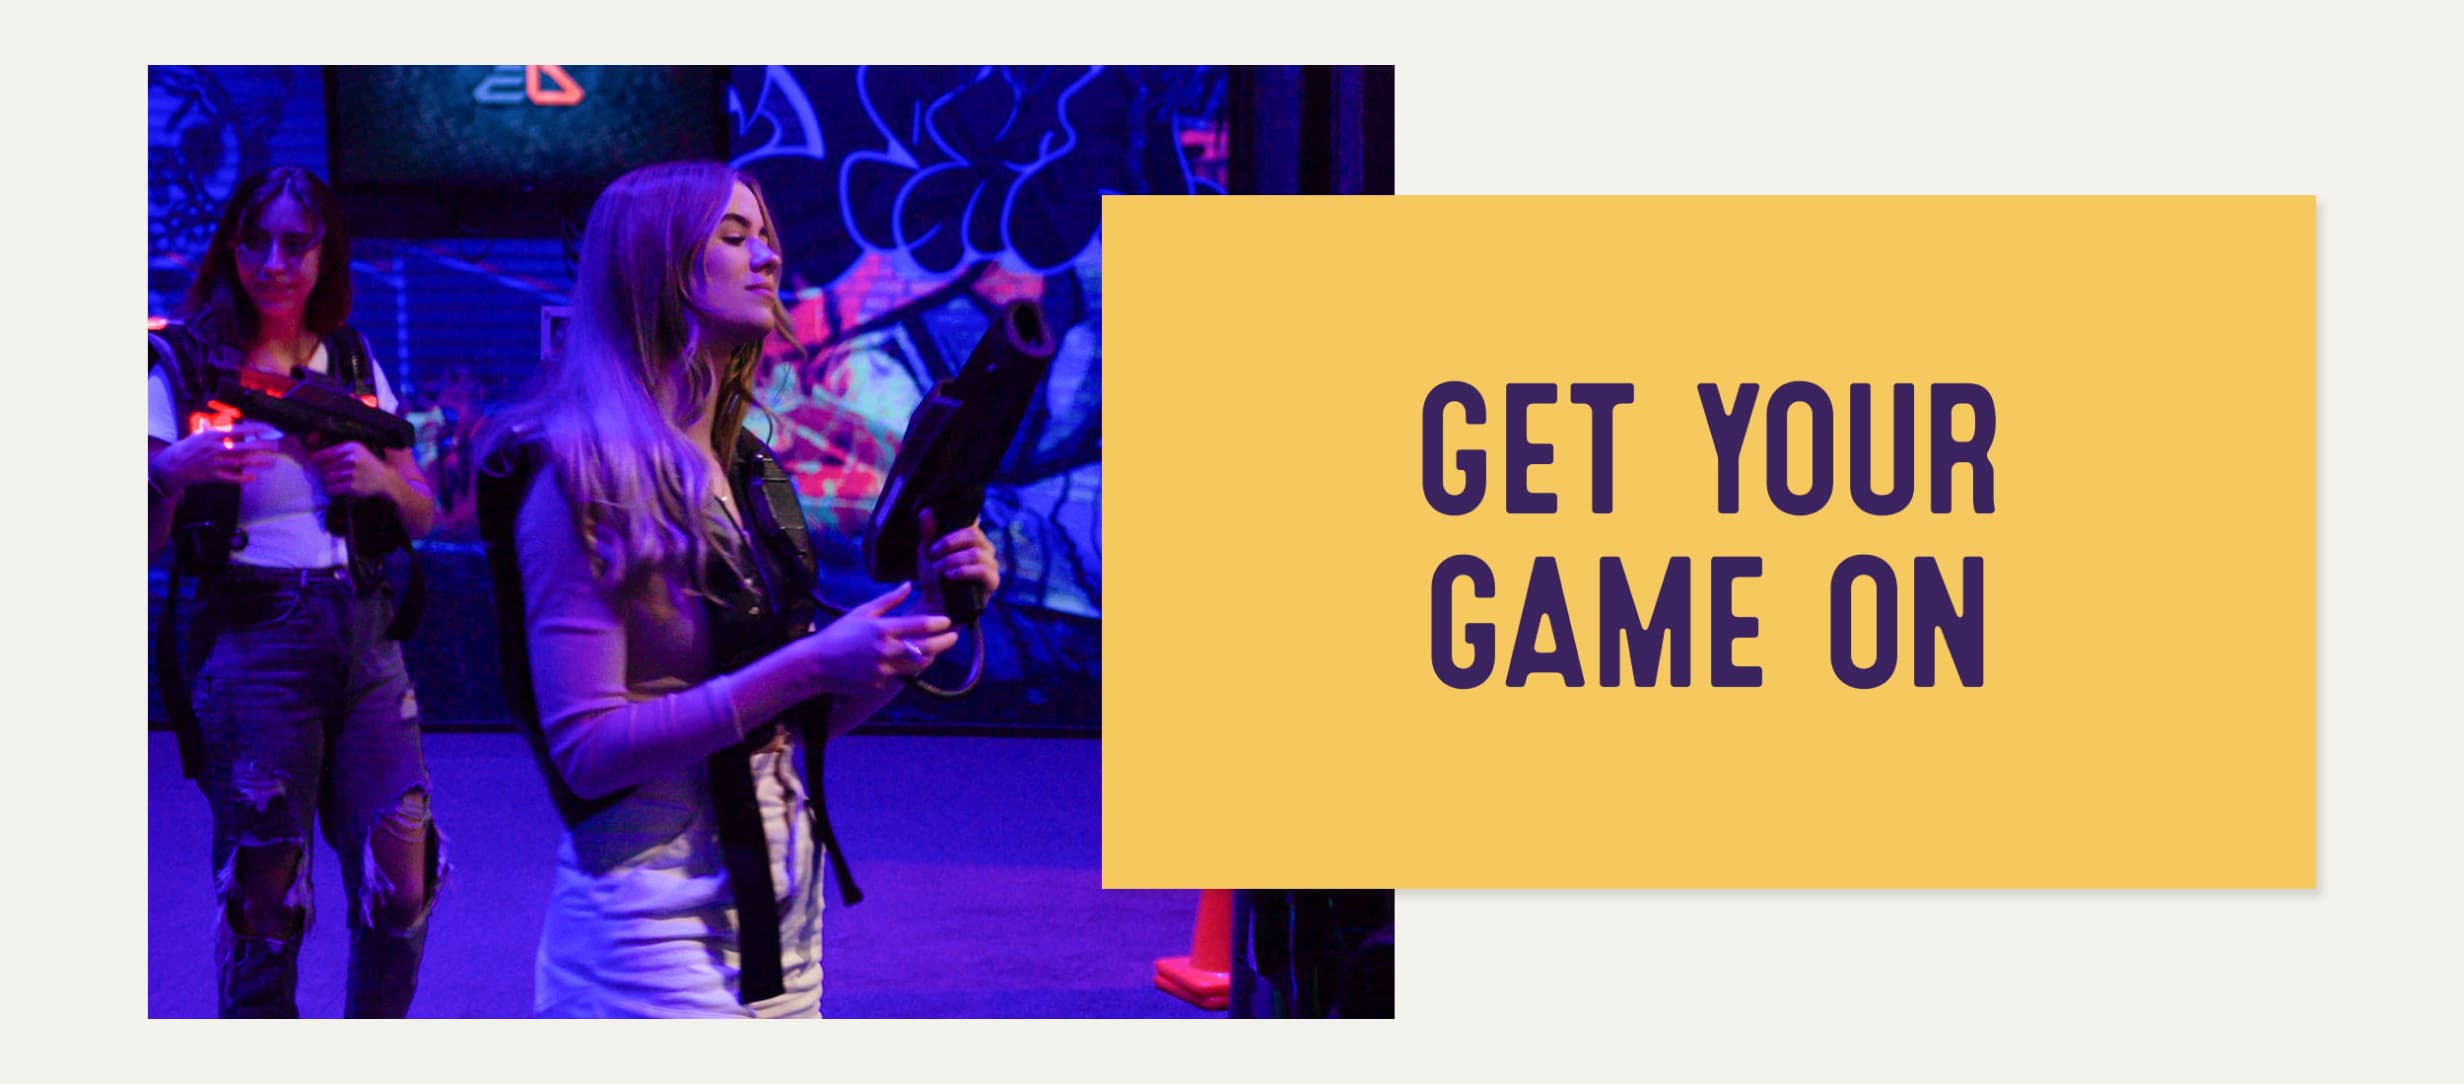 A laser tag session captioned with "Get your game on"